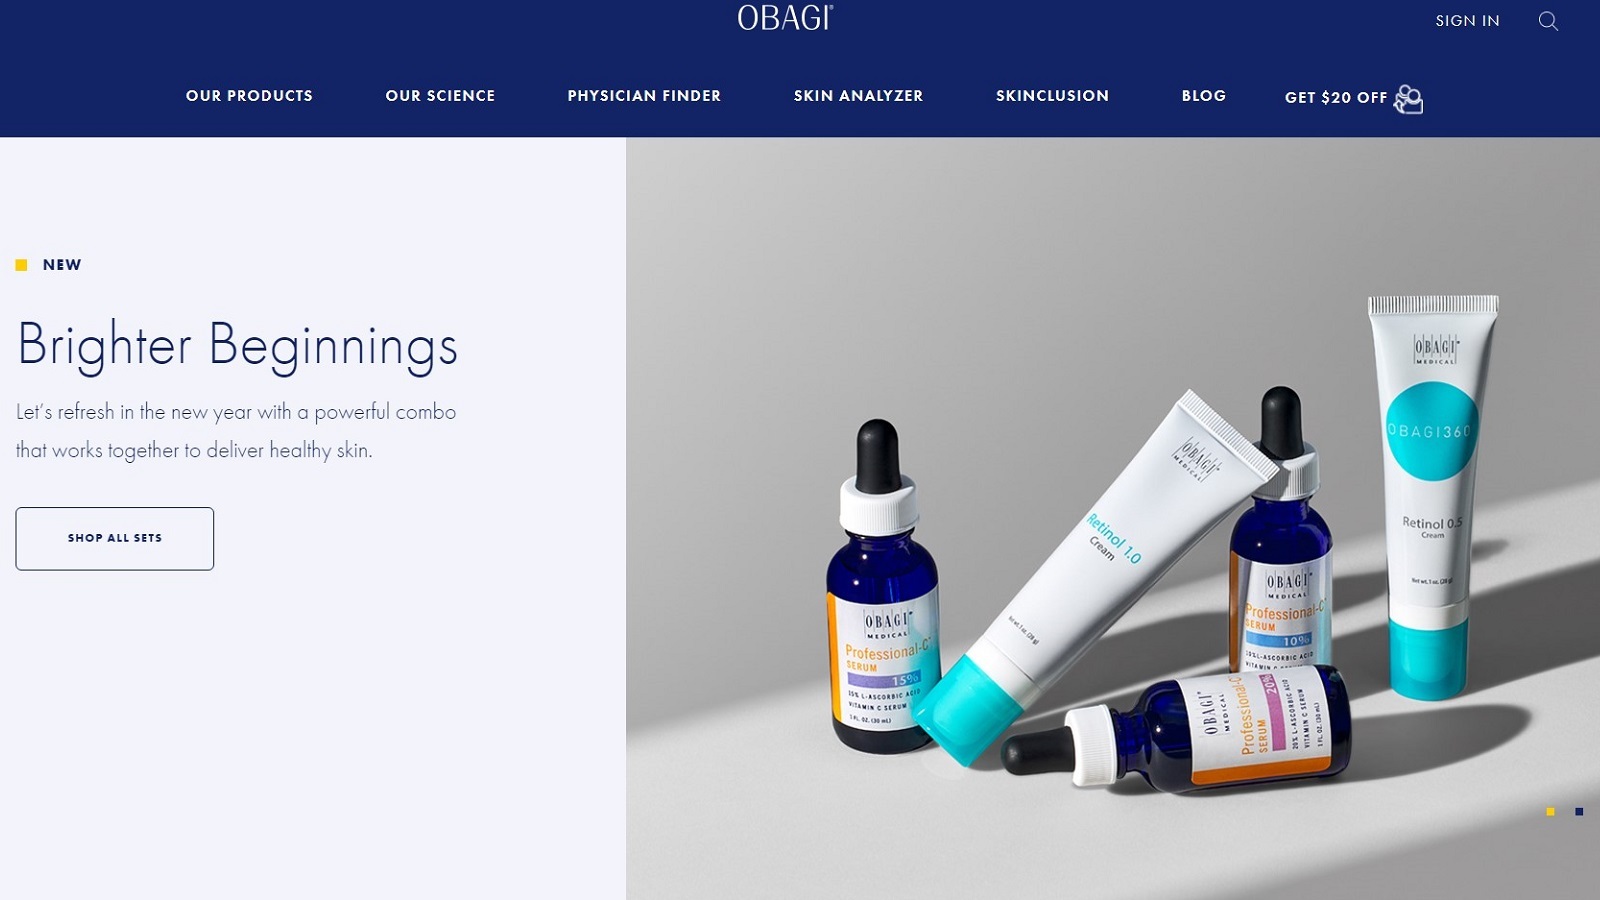 Obagi Skincare Review: Are They High-Quality Skincare Products?